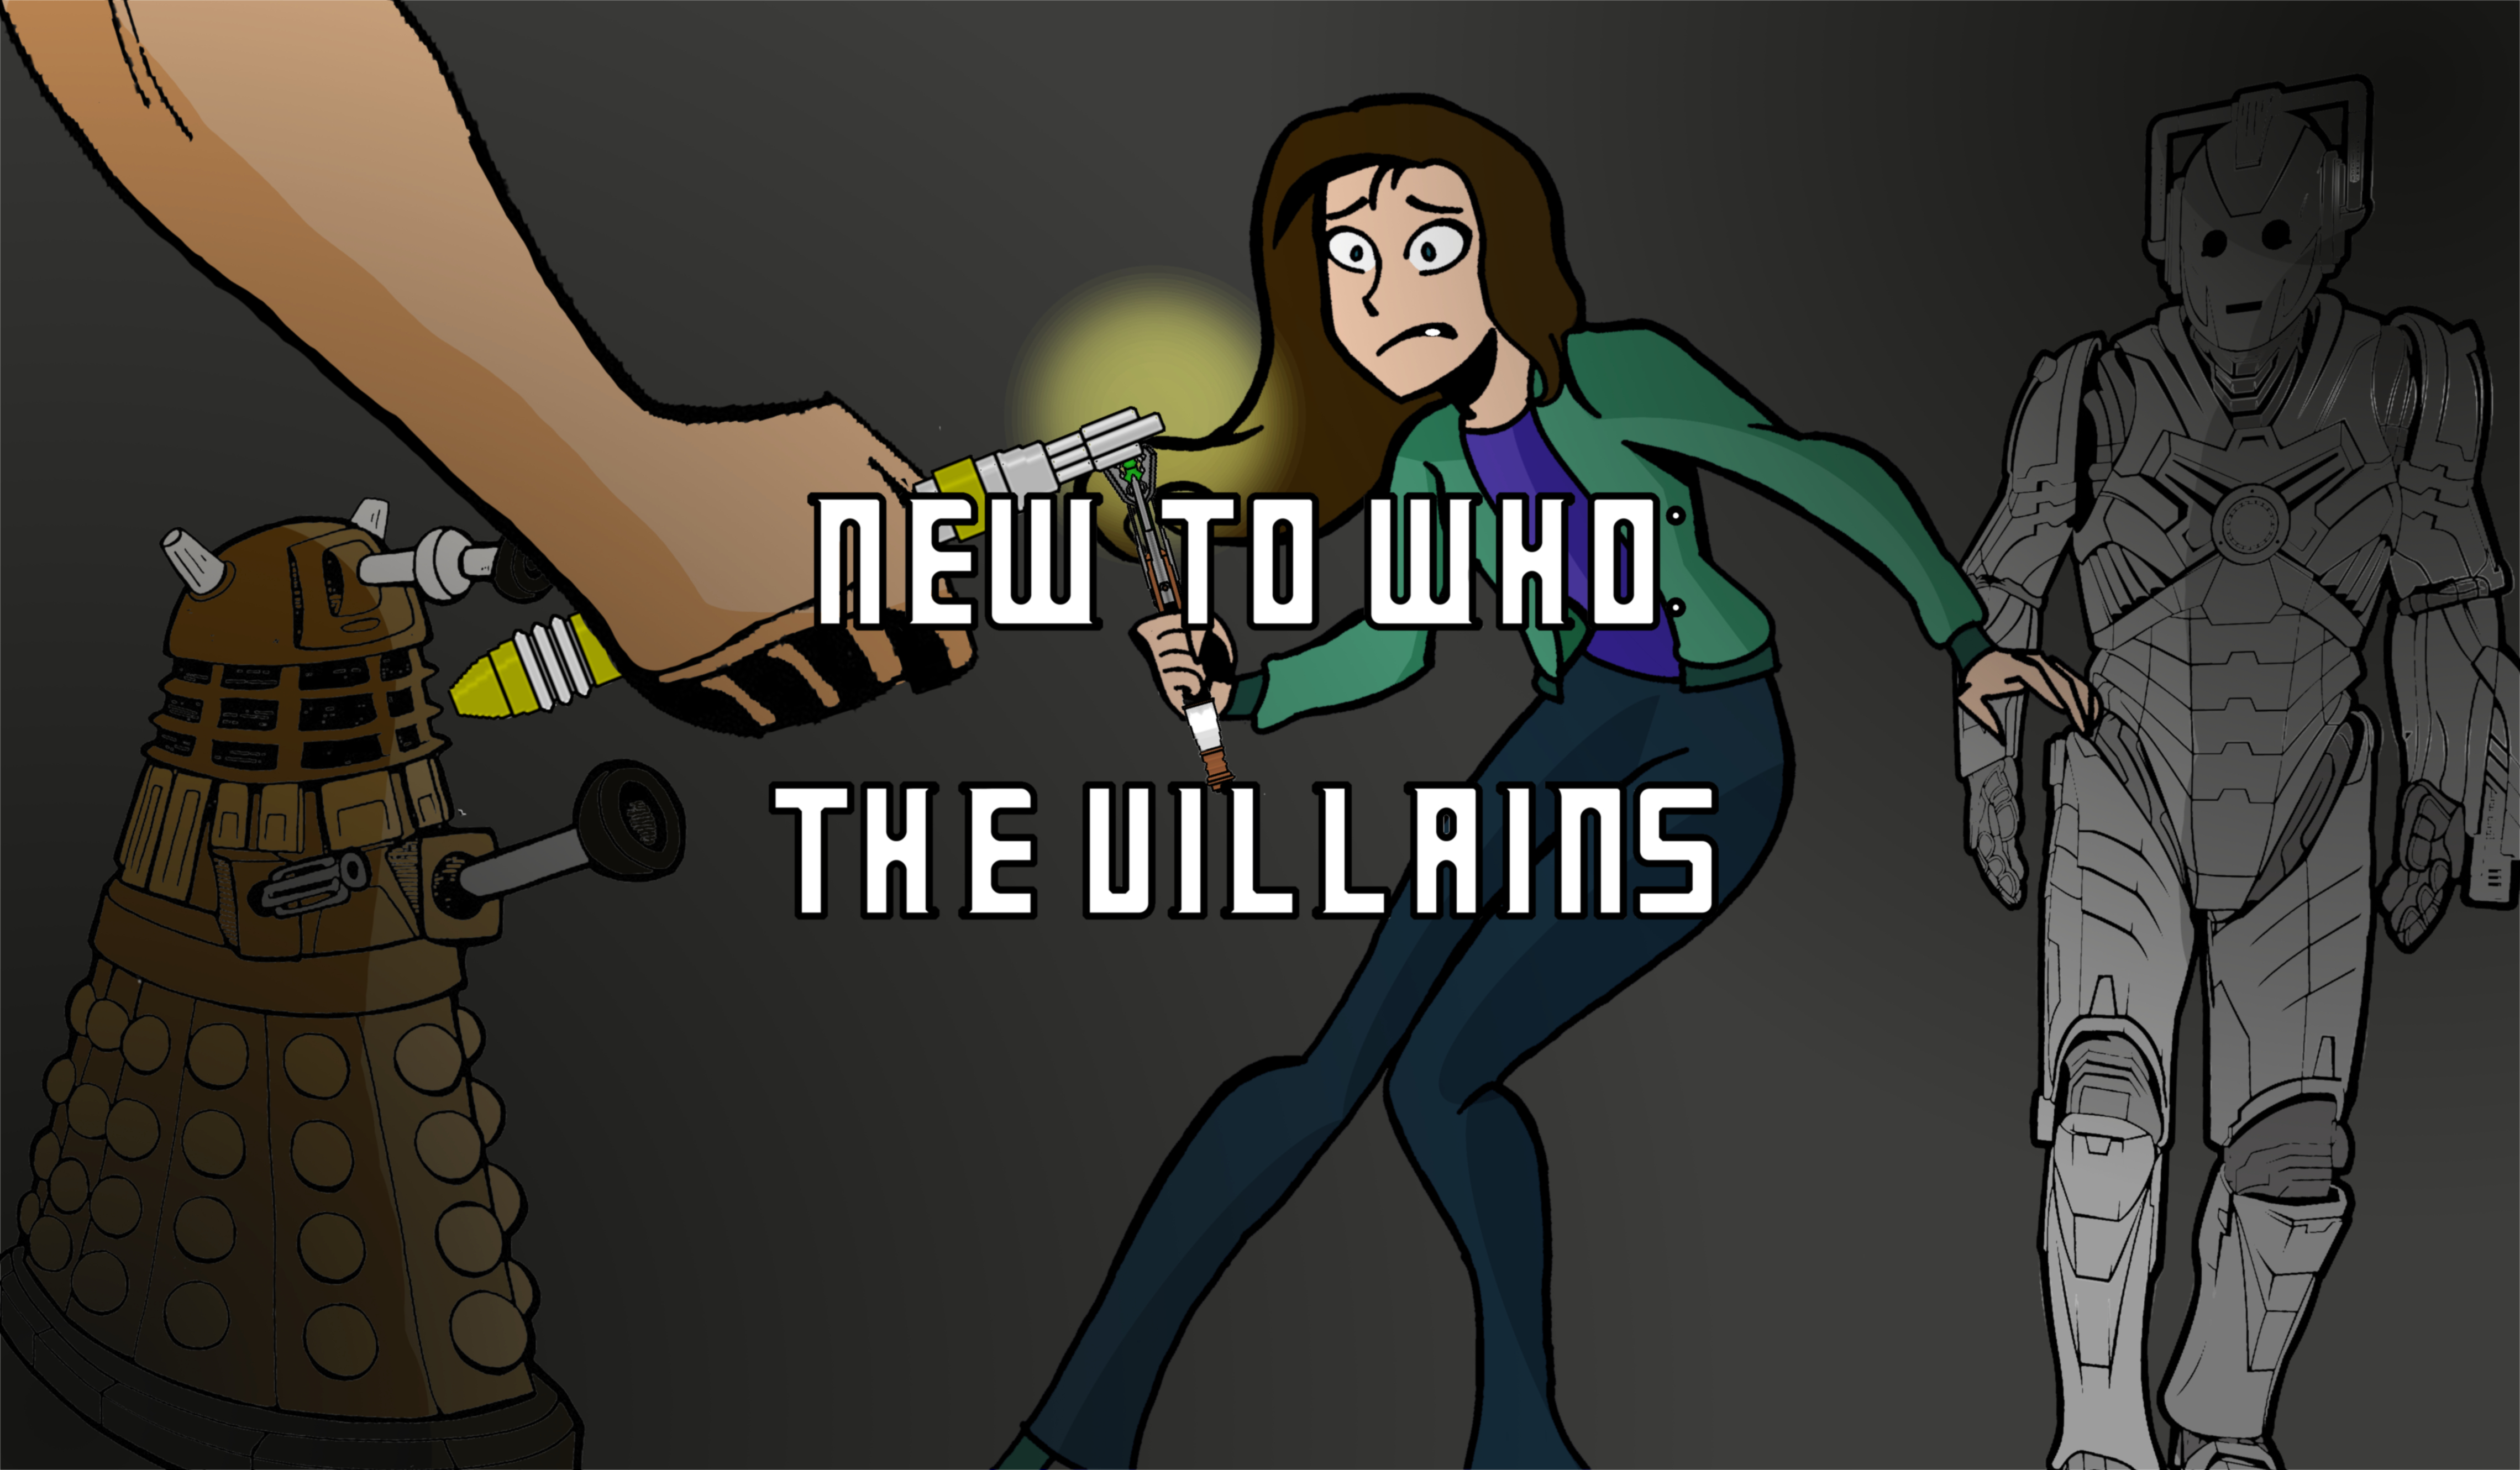 New to Who - The Villains